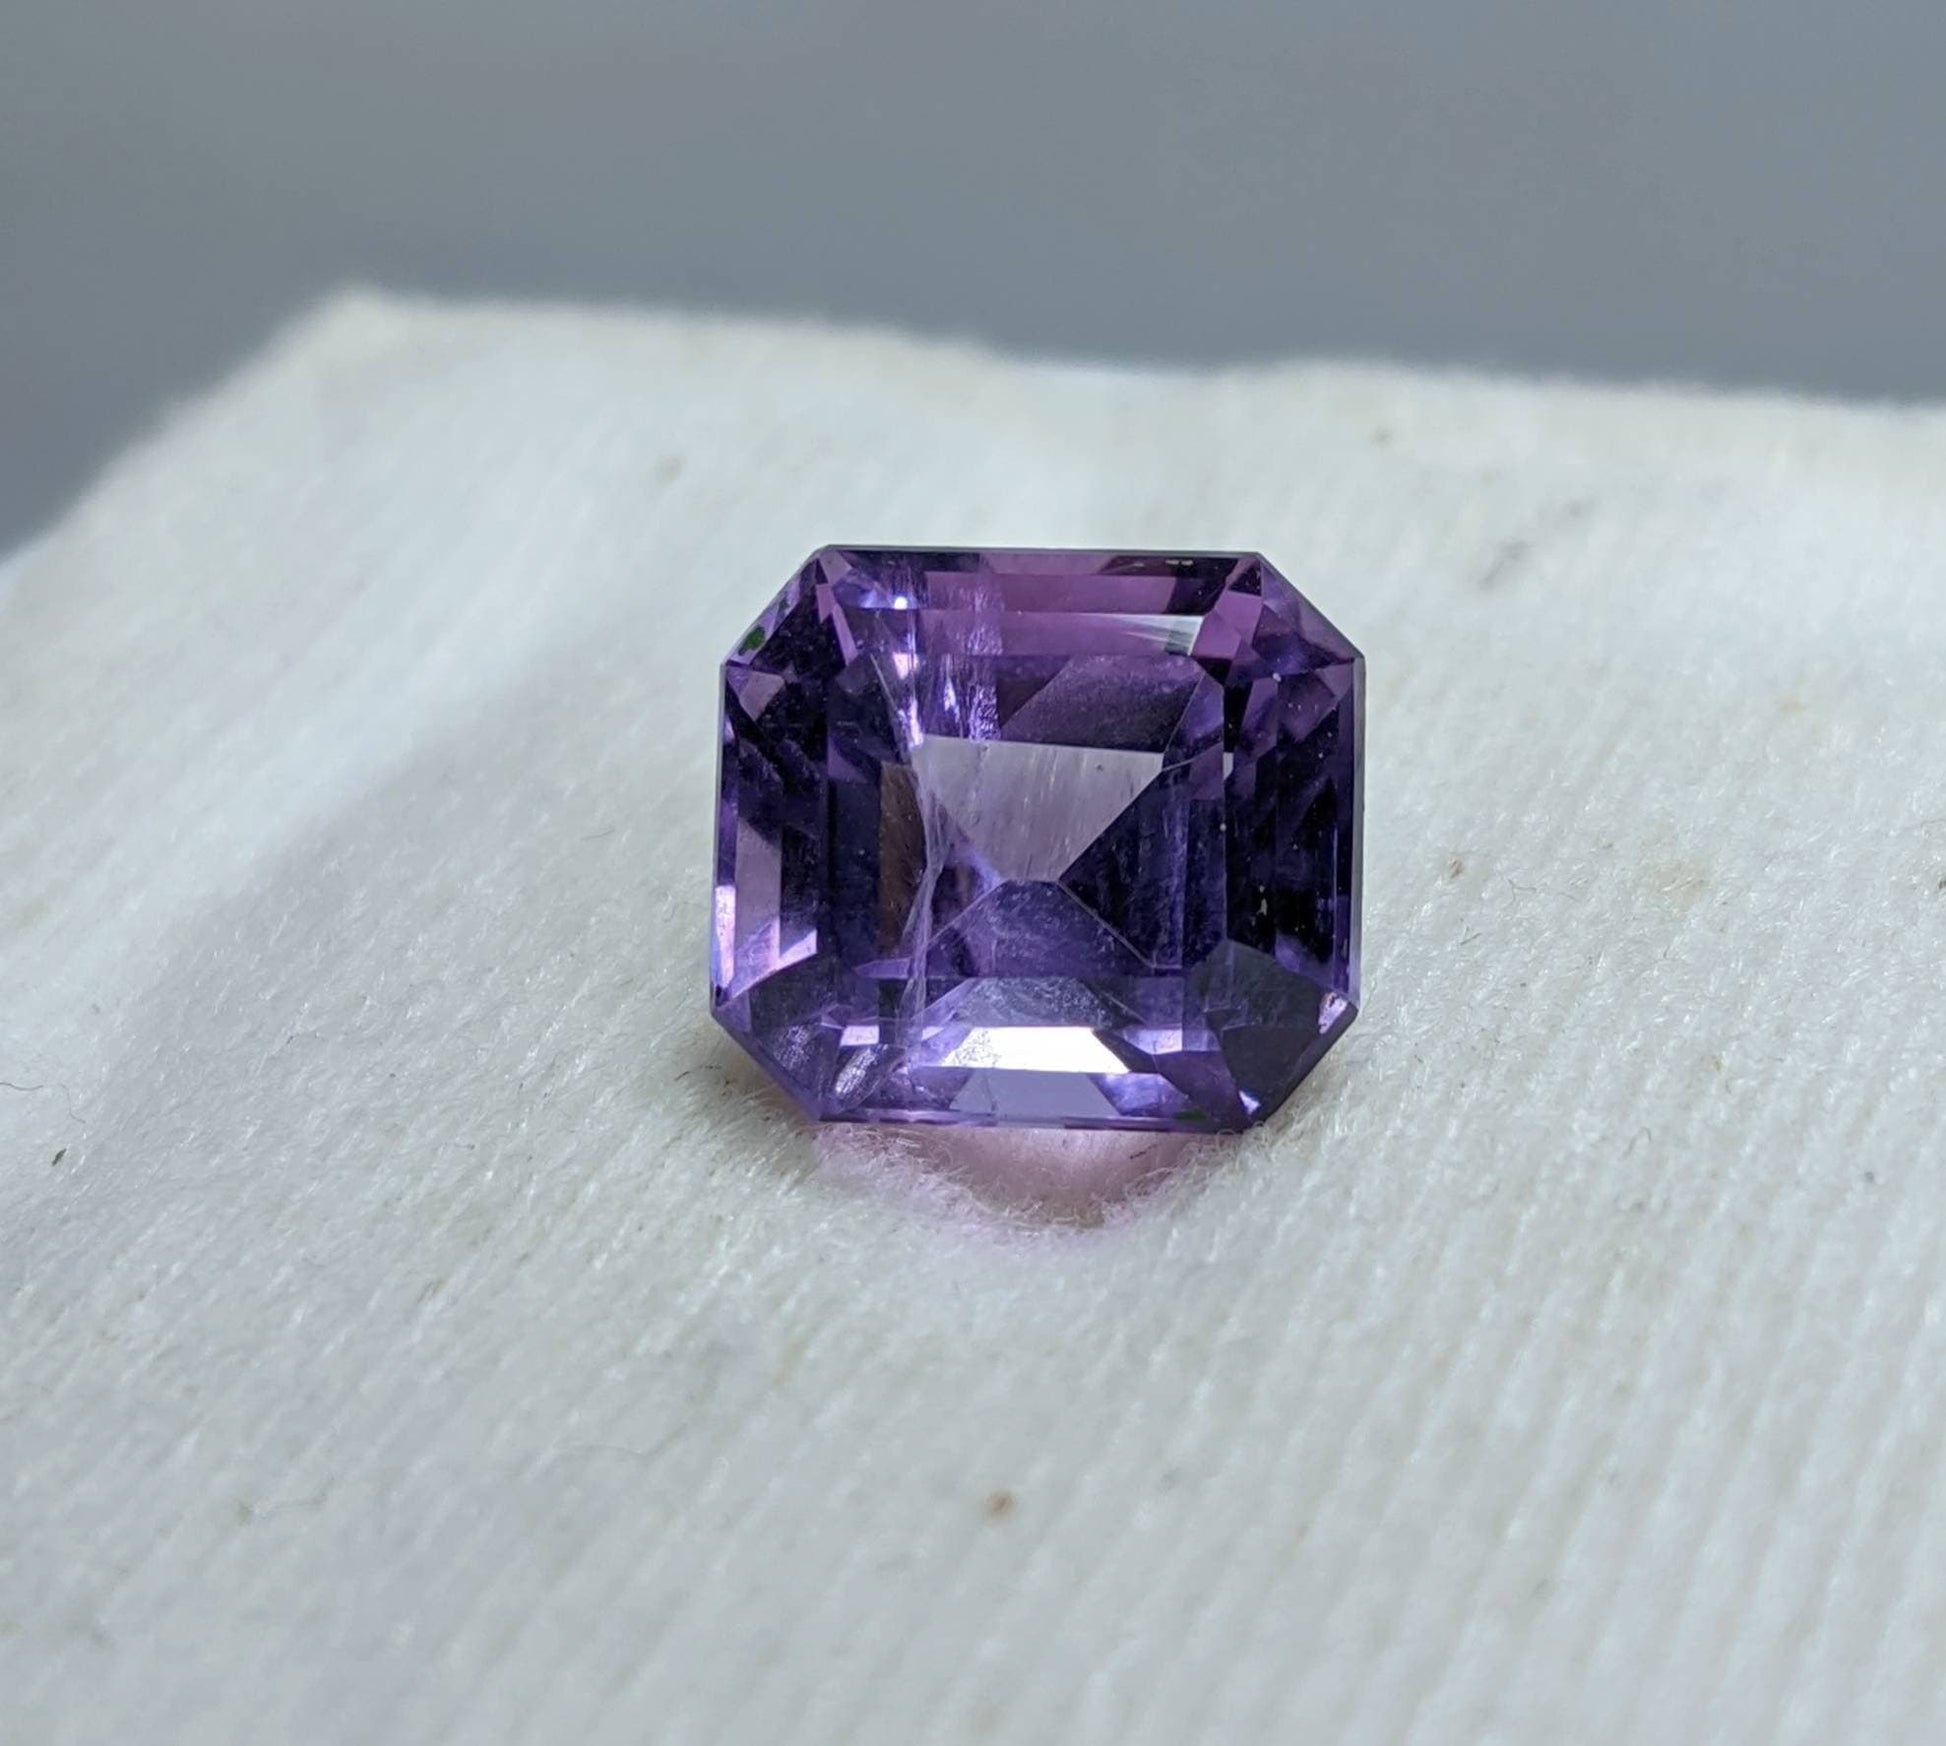 ARSAA GEMS AND MINERALSNatural fine quality beautiful 4 carats deep purple color AAA clarity faceted amethyst gem - Premium  from ARSAA GEMS AND MINERALS - Just $10.00! Shop now at ARSAA GEMS AND MINERALS